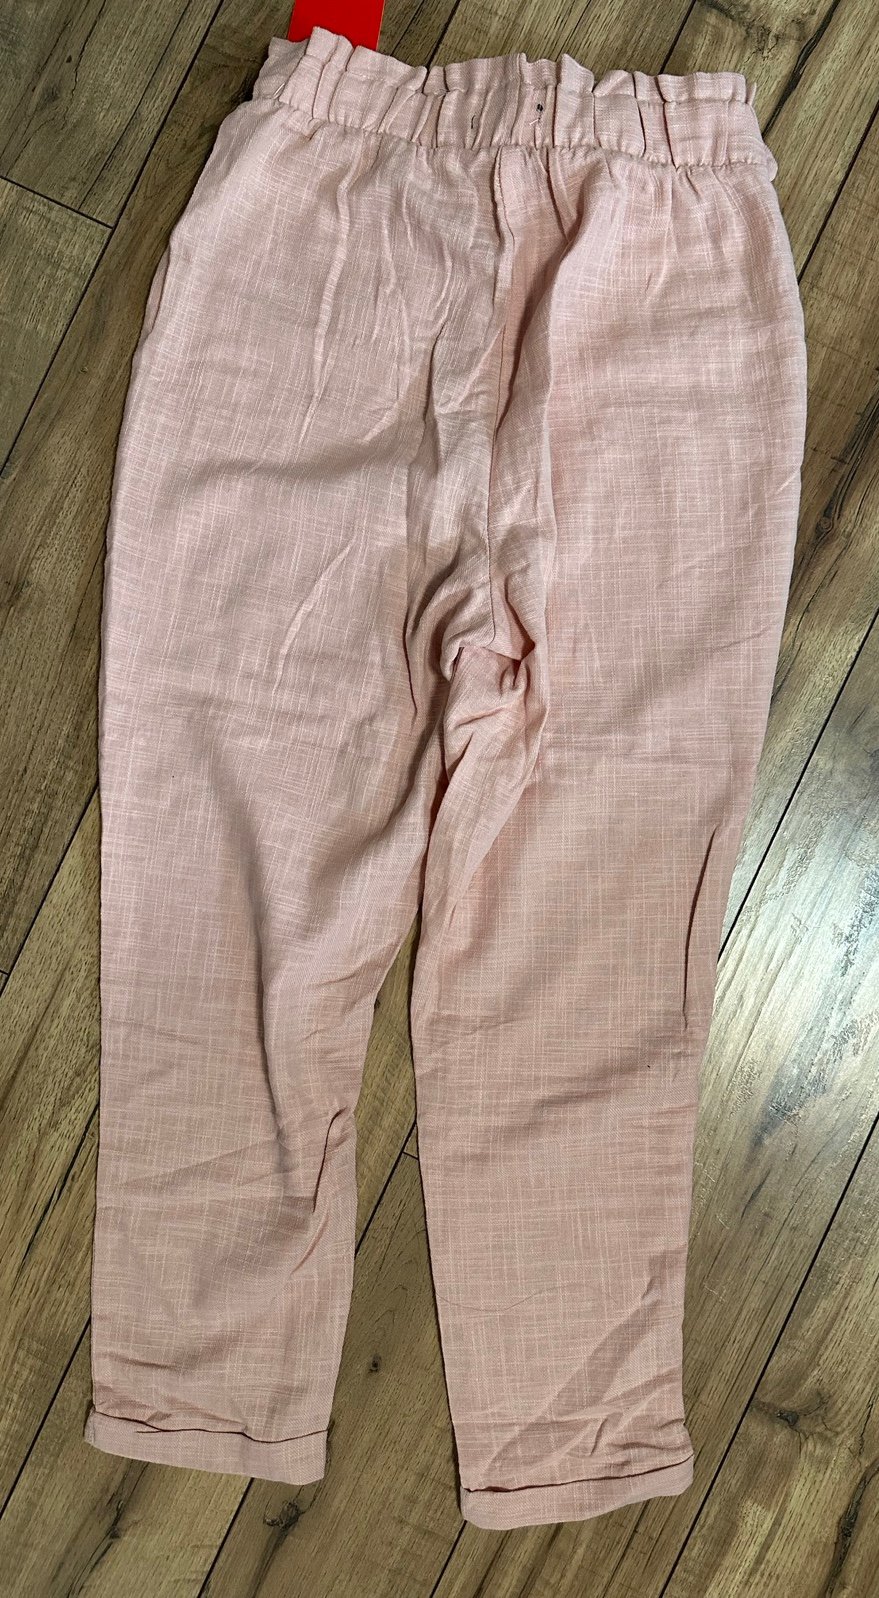 Wholesale price Women’s pink linen trouser pant small NWT mWWOu1FMn Cool